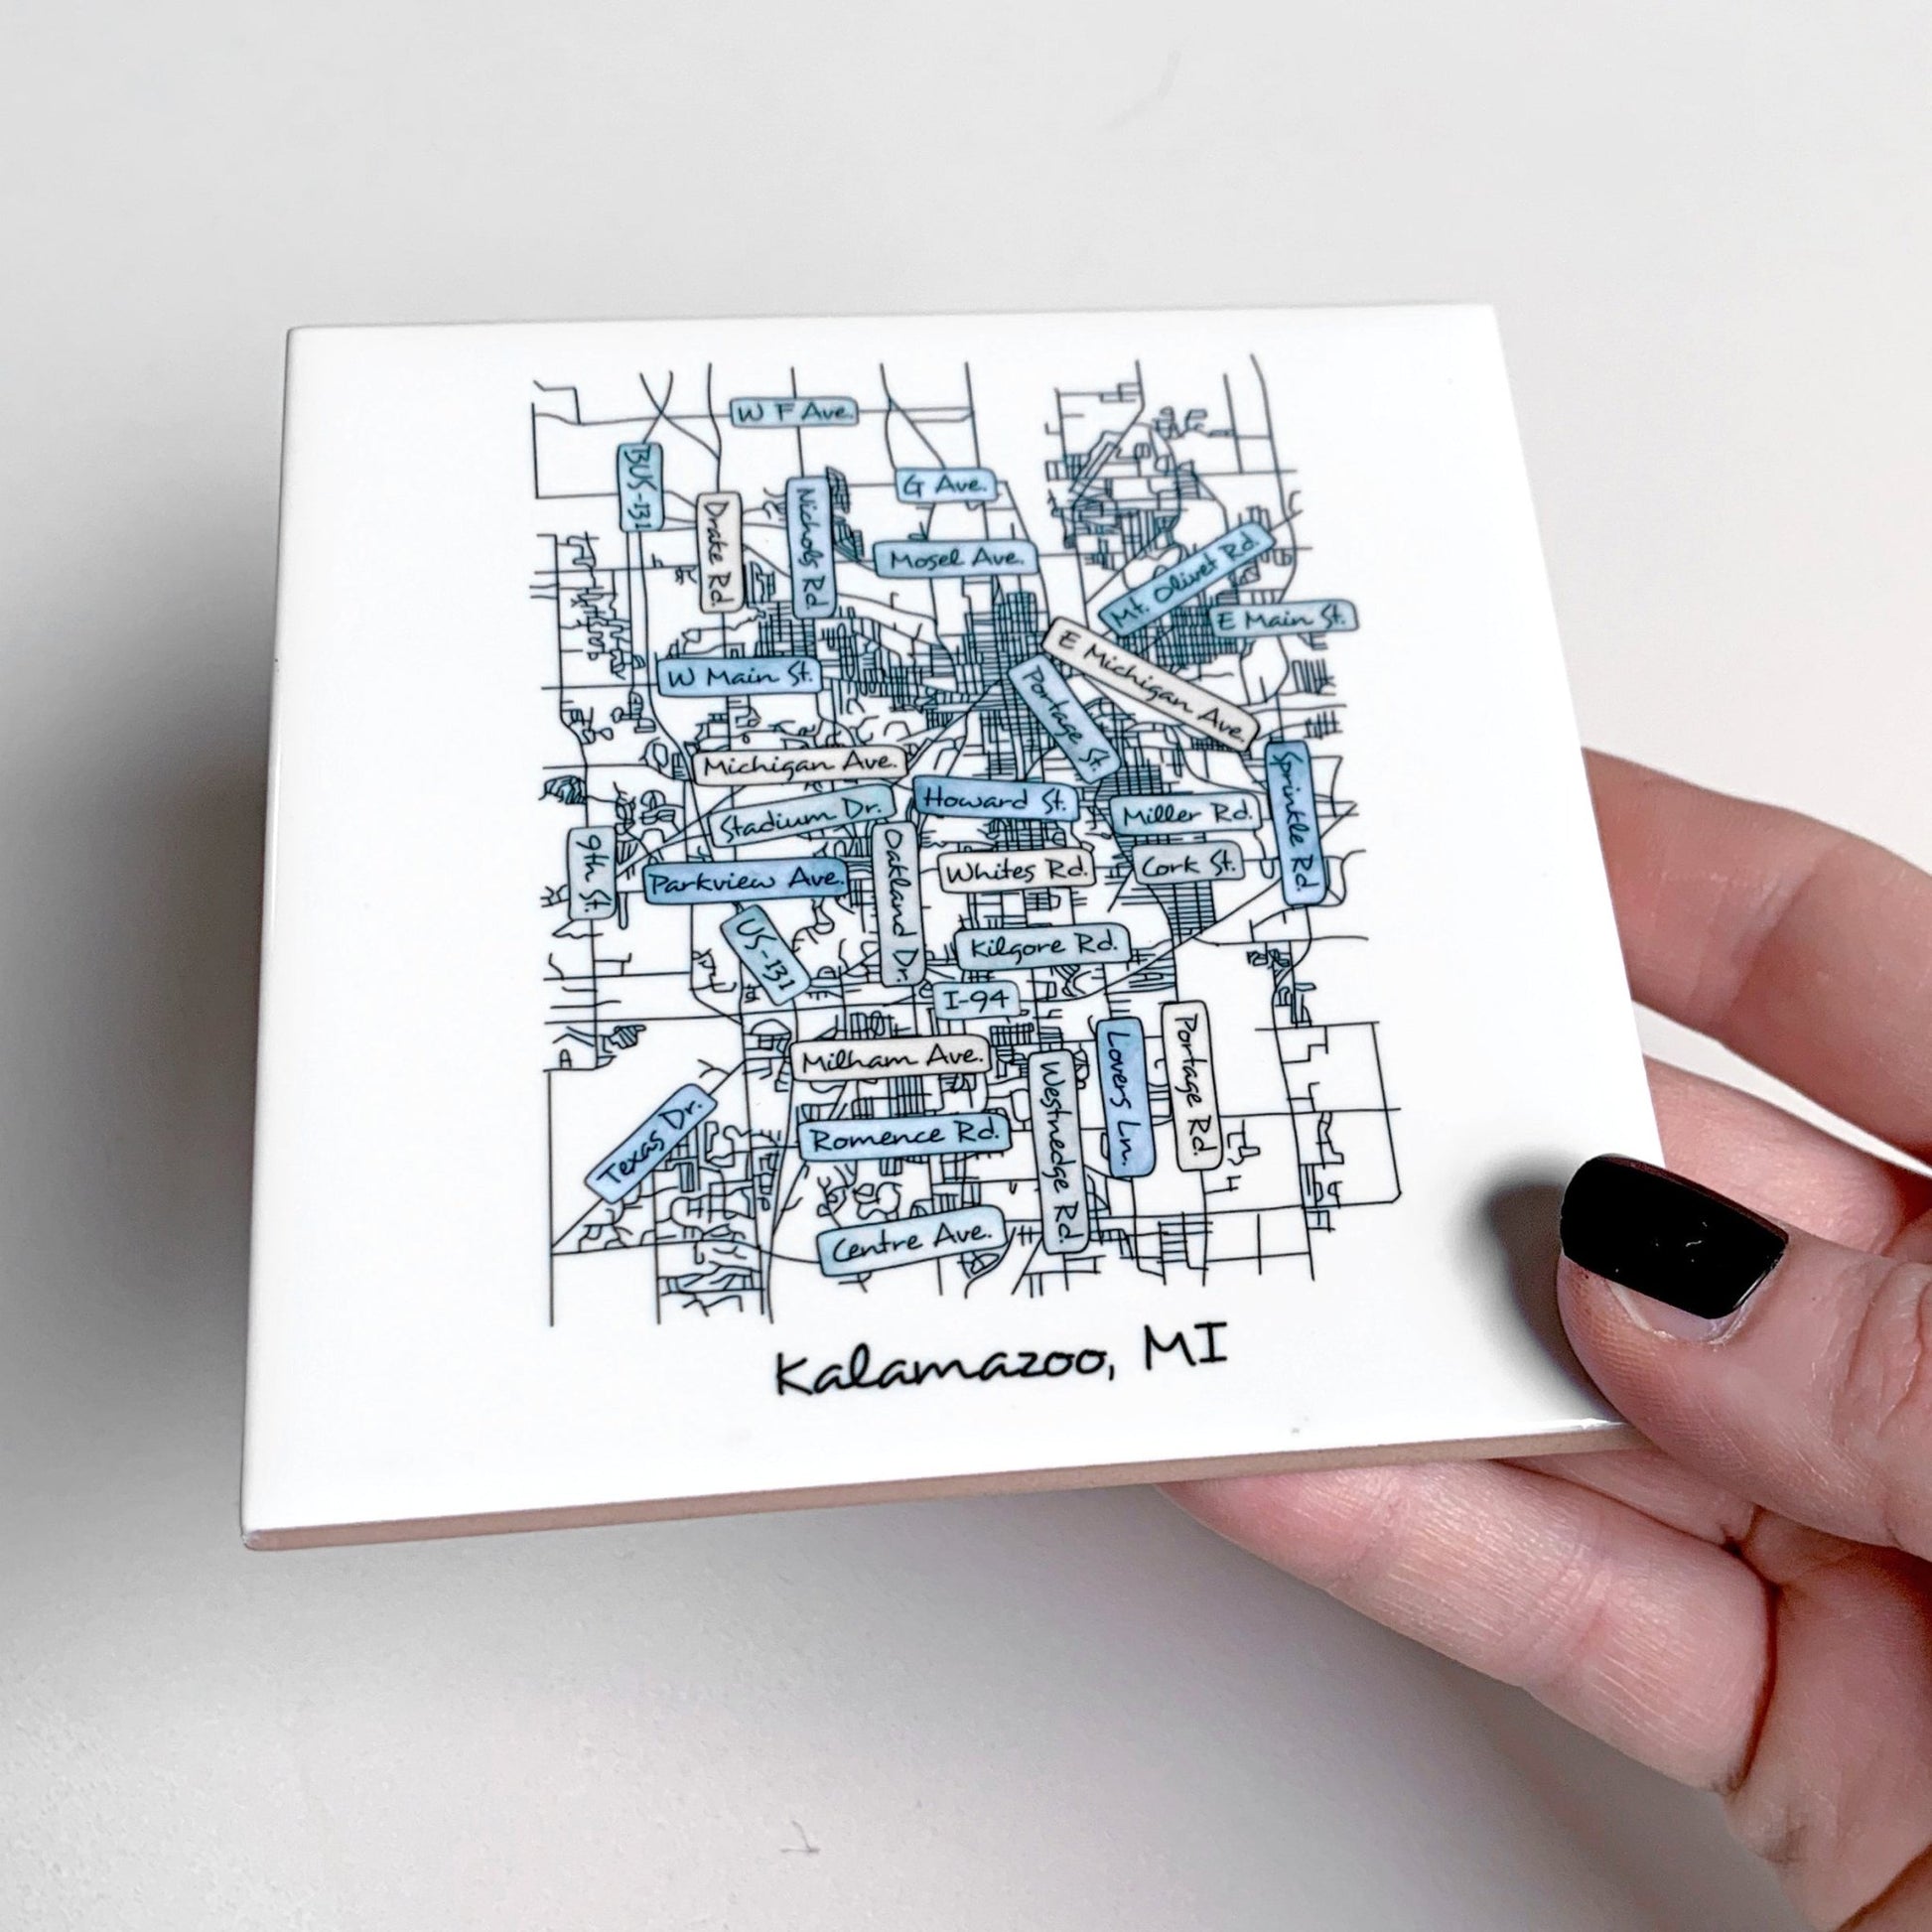 A hand holding a ceramic coaster with a hand-drawn street map on it, showing the tile edges